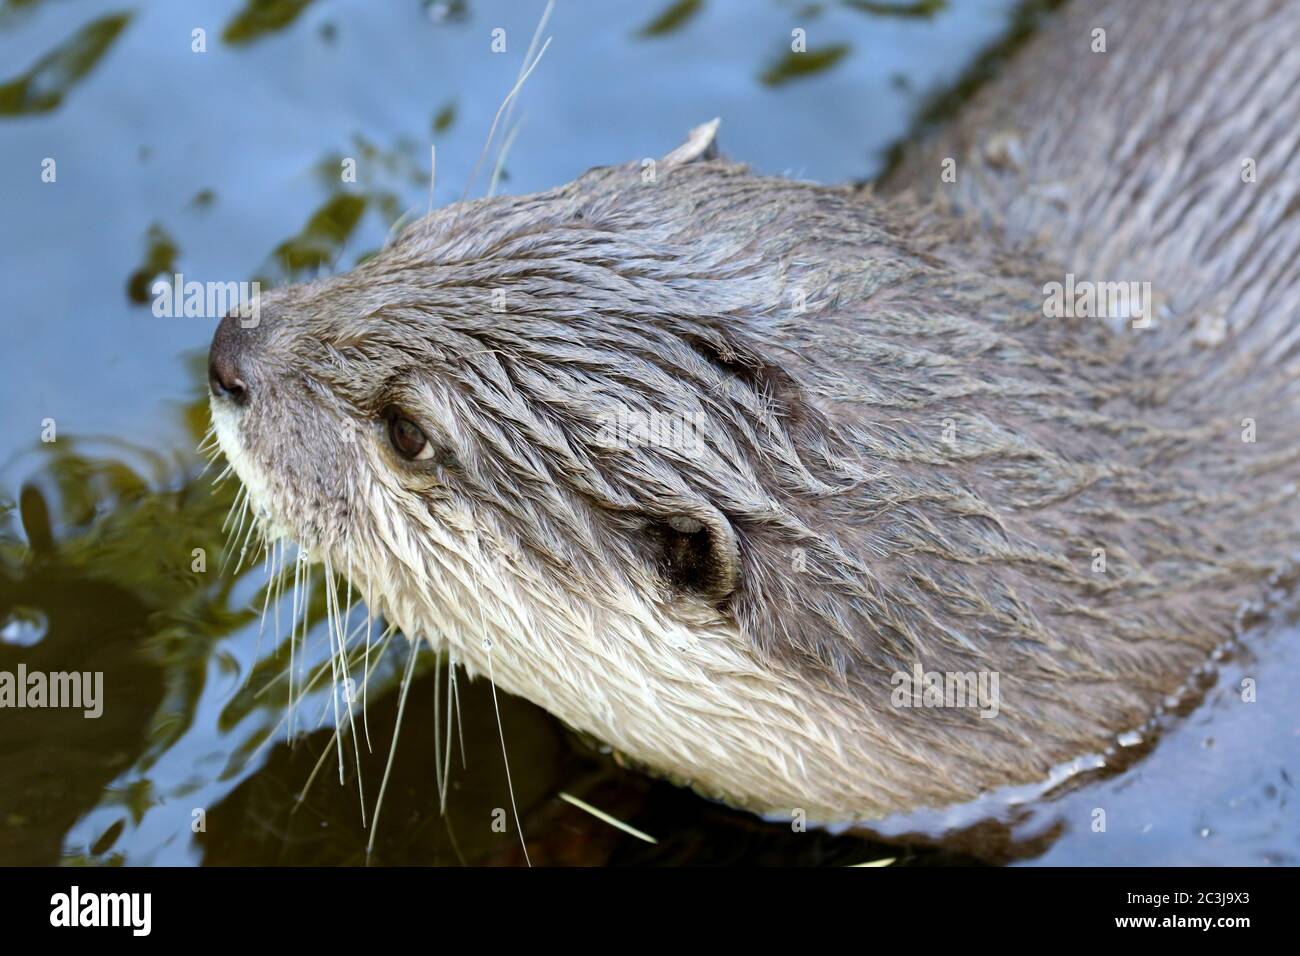 North American RIVER OTTER Lontra canadensis Stock Photo